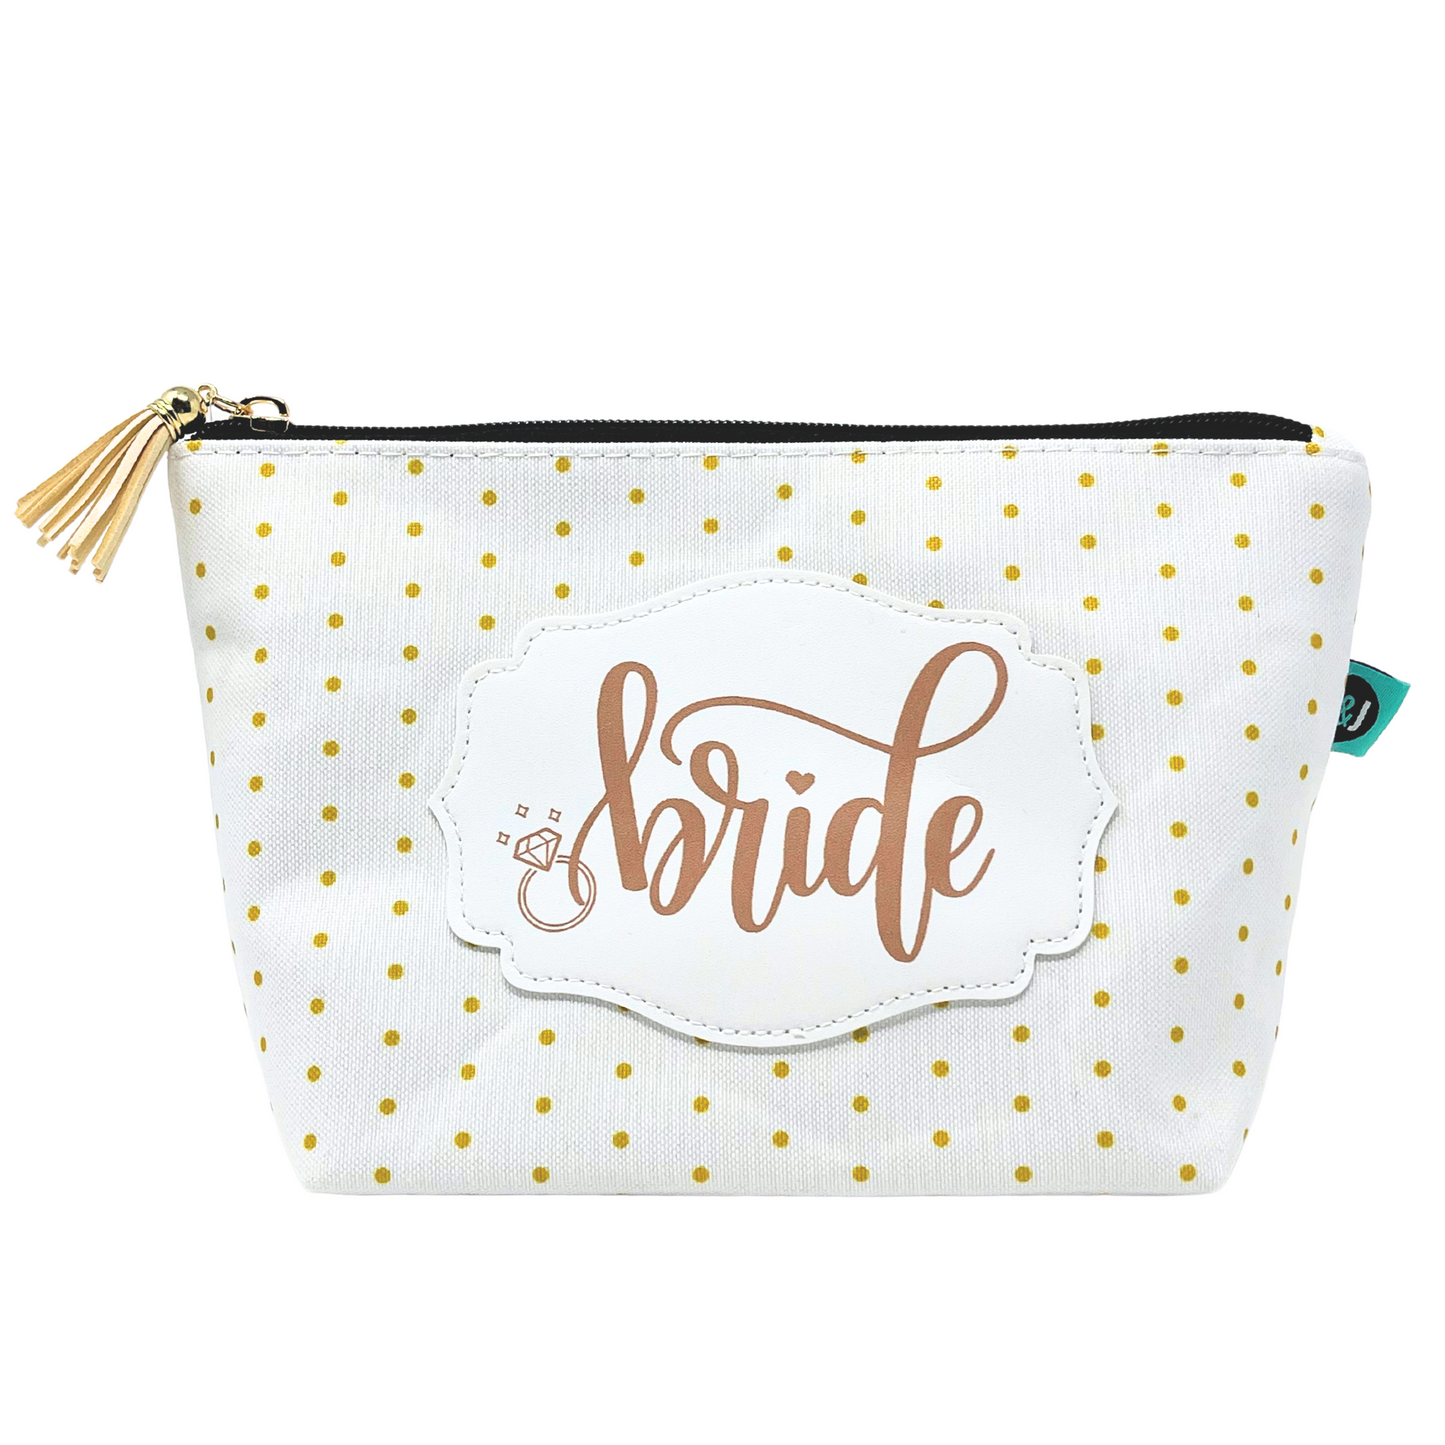 Brooke & Jess Designs Bride Janie Pouch Gifts for Women Gold Dotted Makeup Bags Cosmetic Bag Travel Toiletry Makeup Pouch Pencil Bag with Zipper Best Wedding Gifts